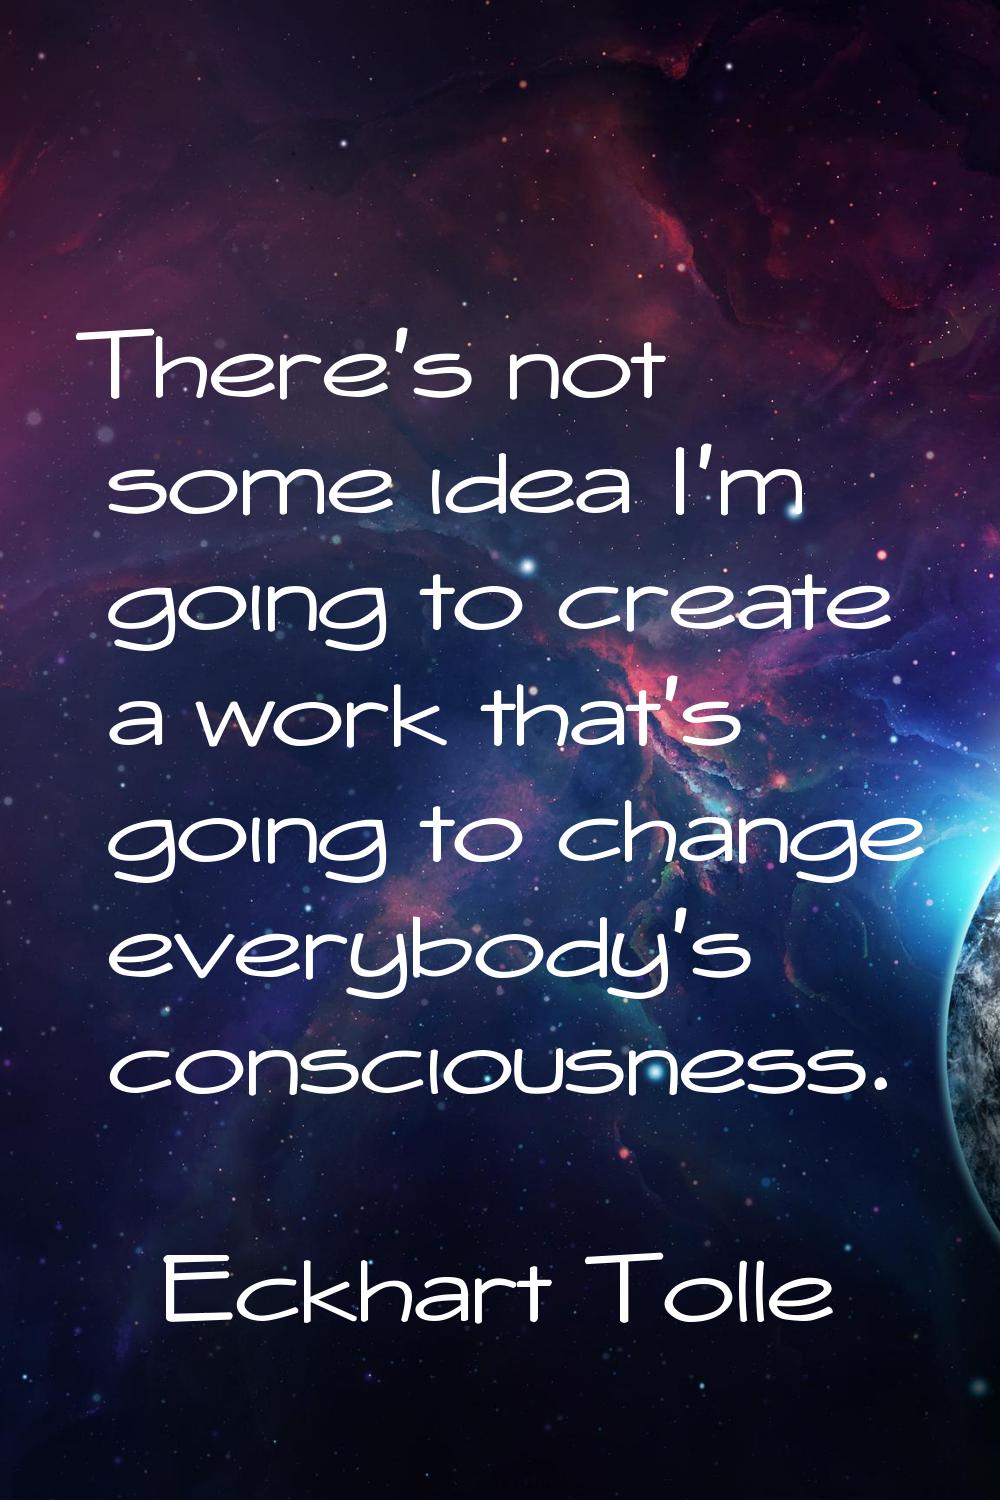 There's not some idea I'm going to create a work that's going to change everybody's consciousness.